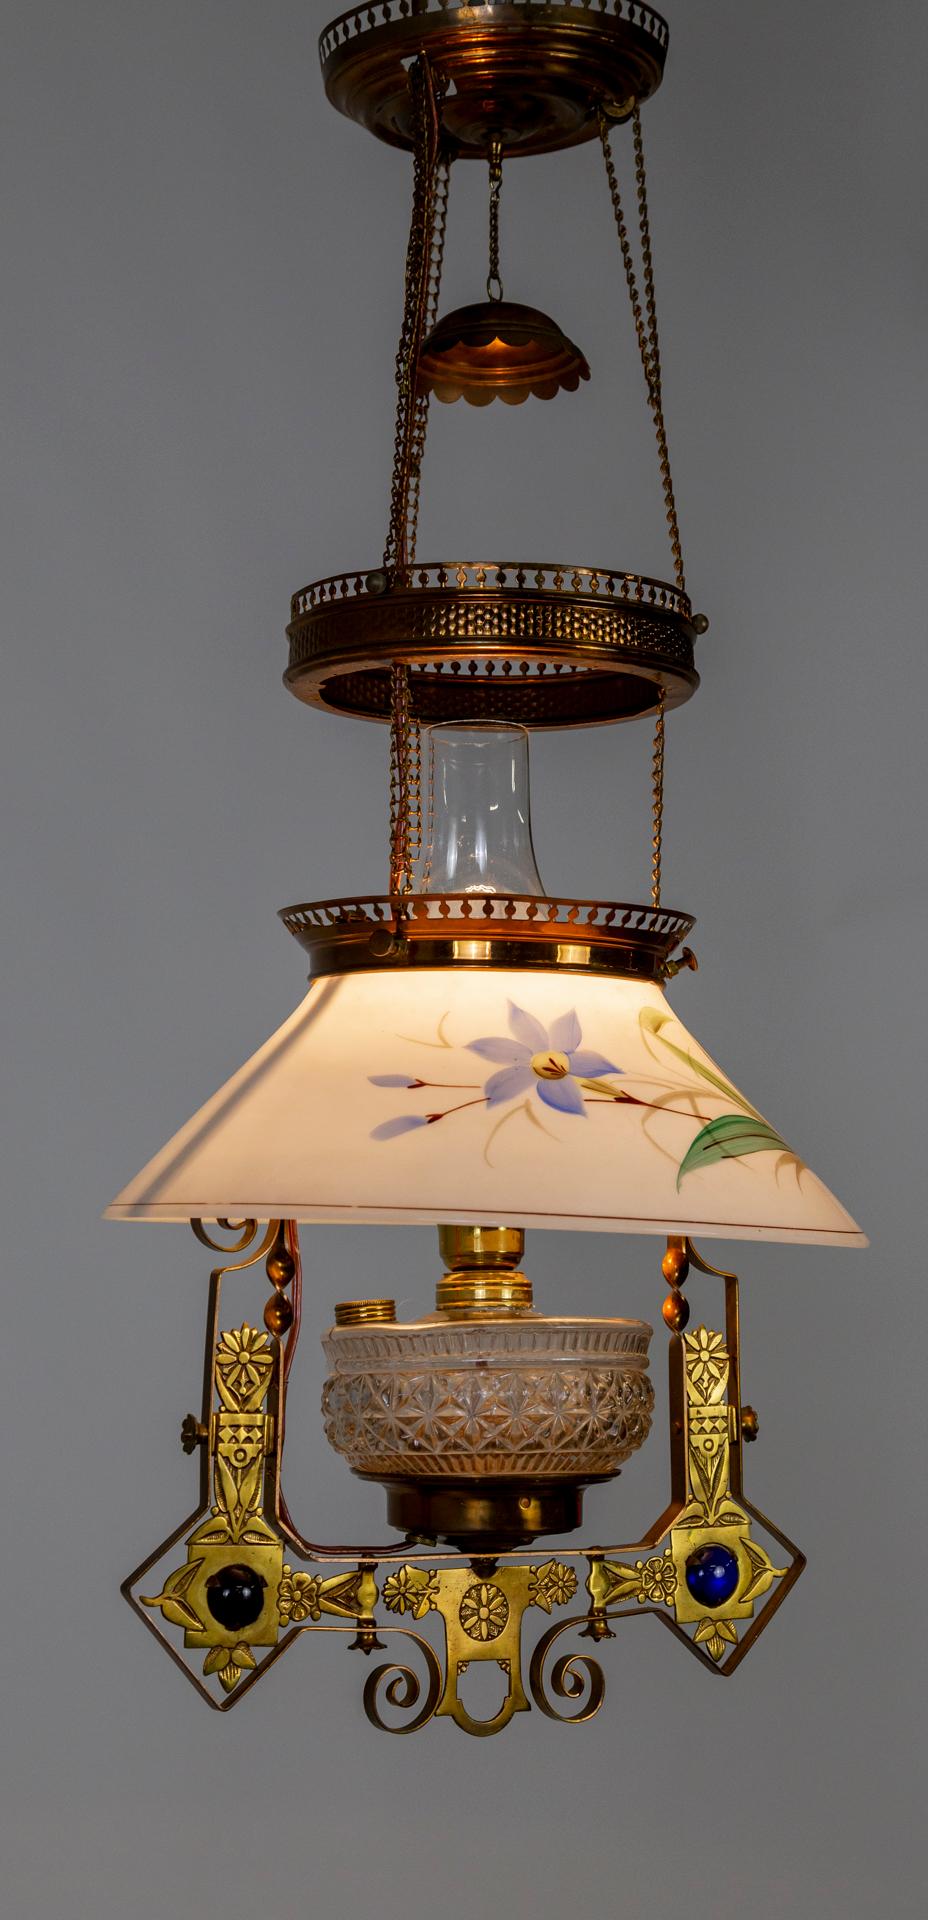 A lengthy, hanging, library oil lamp from the mid 1880s, in a striking Eastlake Victorian style; now electrified. A copper and brass, multitiered design on chains holding the shade, molded glass body, hurricane glass, and smoke cap. The milk glass